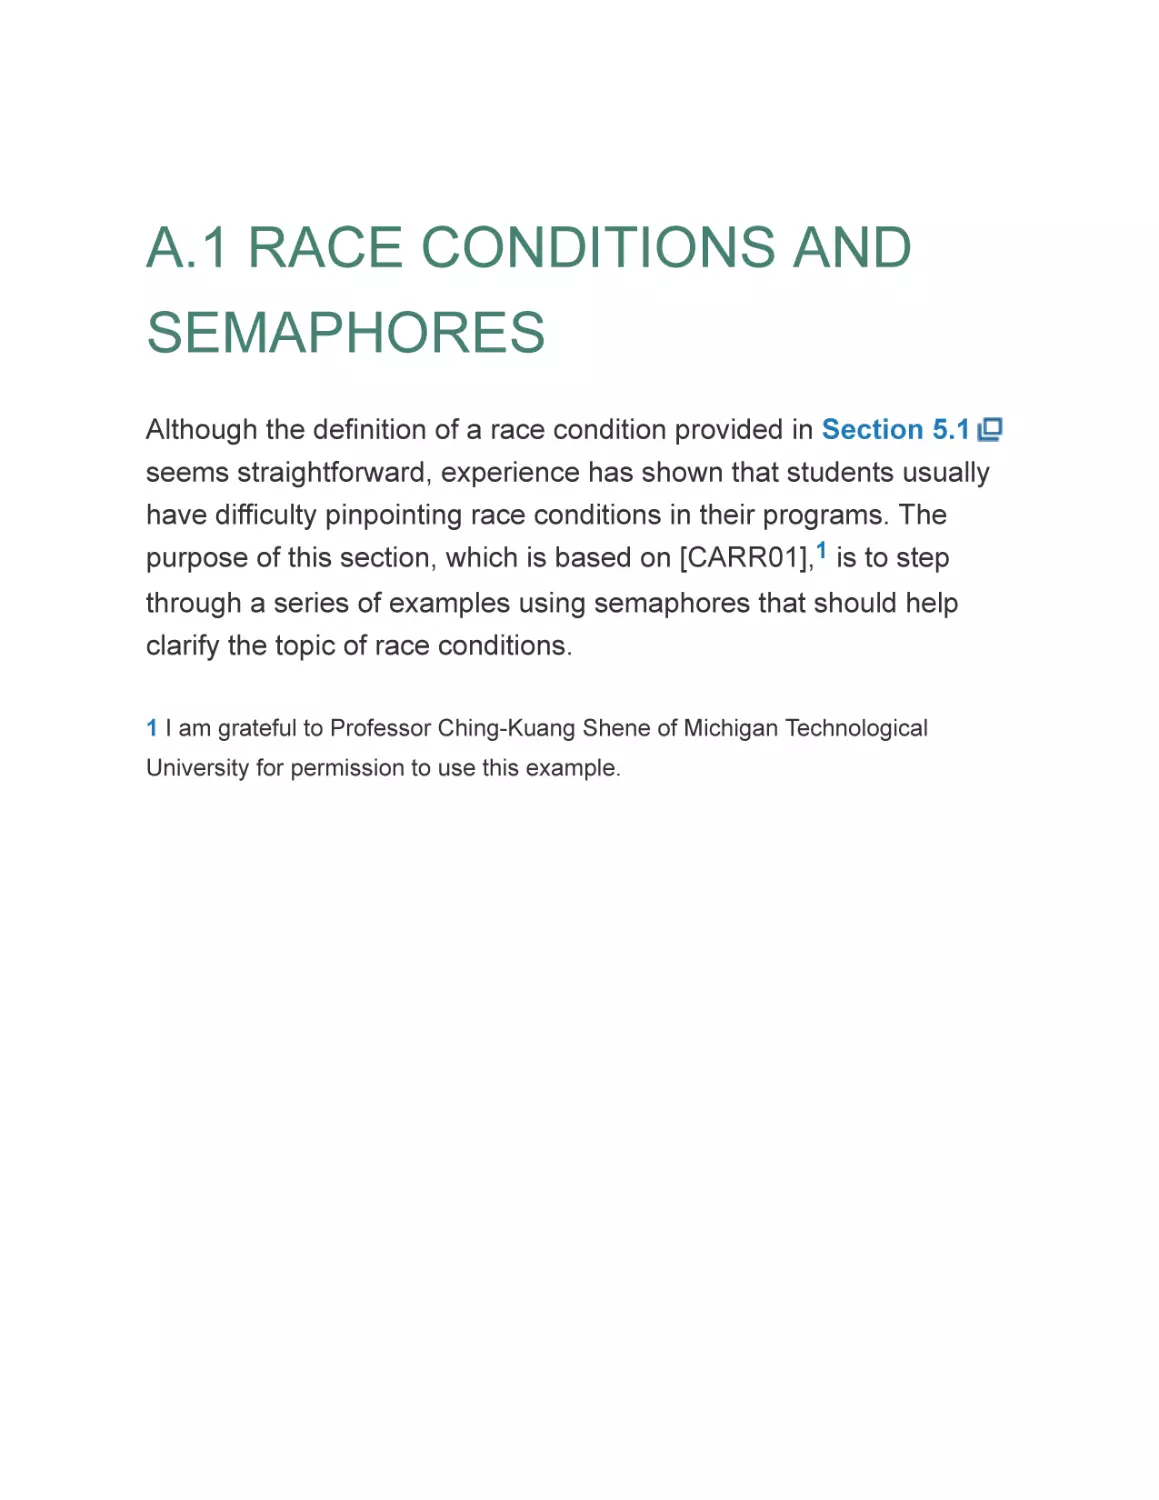 A.1 RACE CONDITIONS AND SEMAPHORES